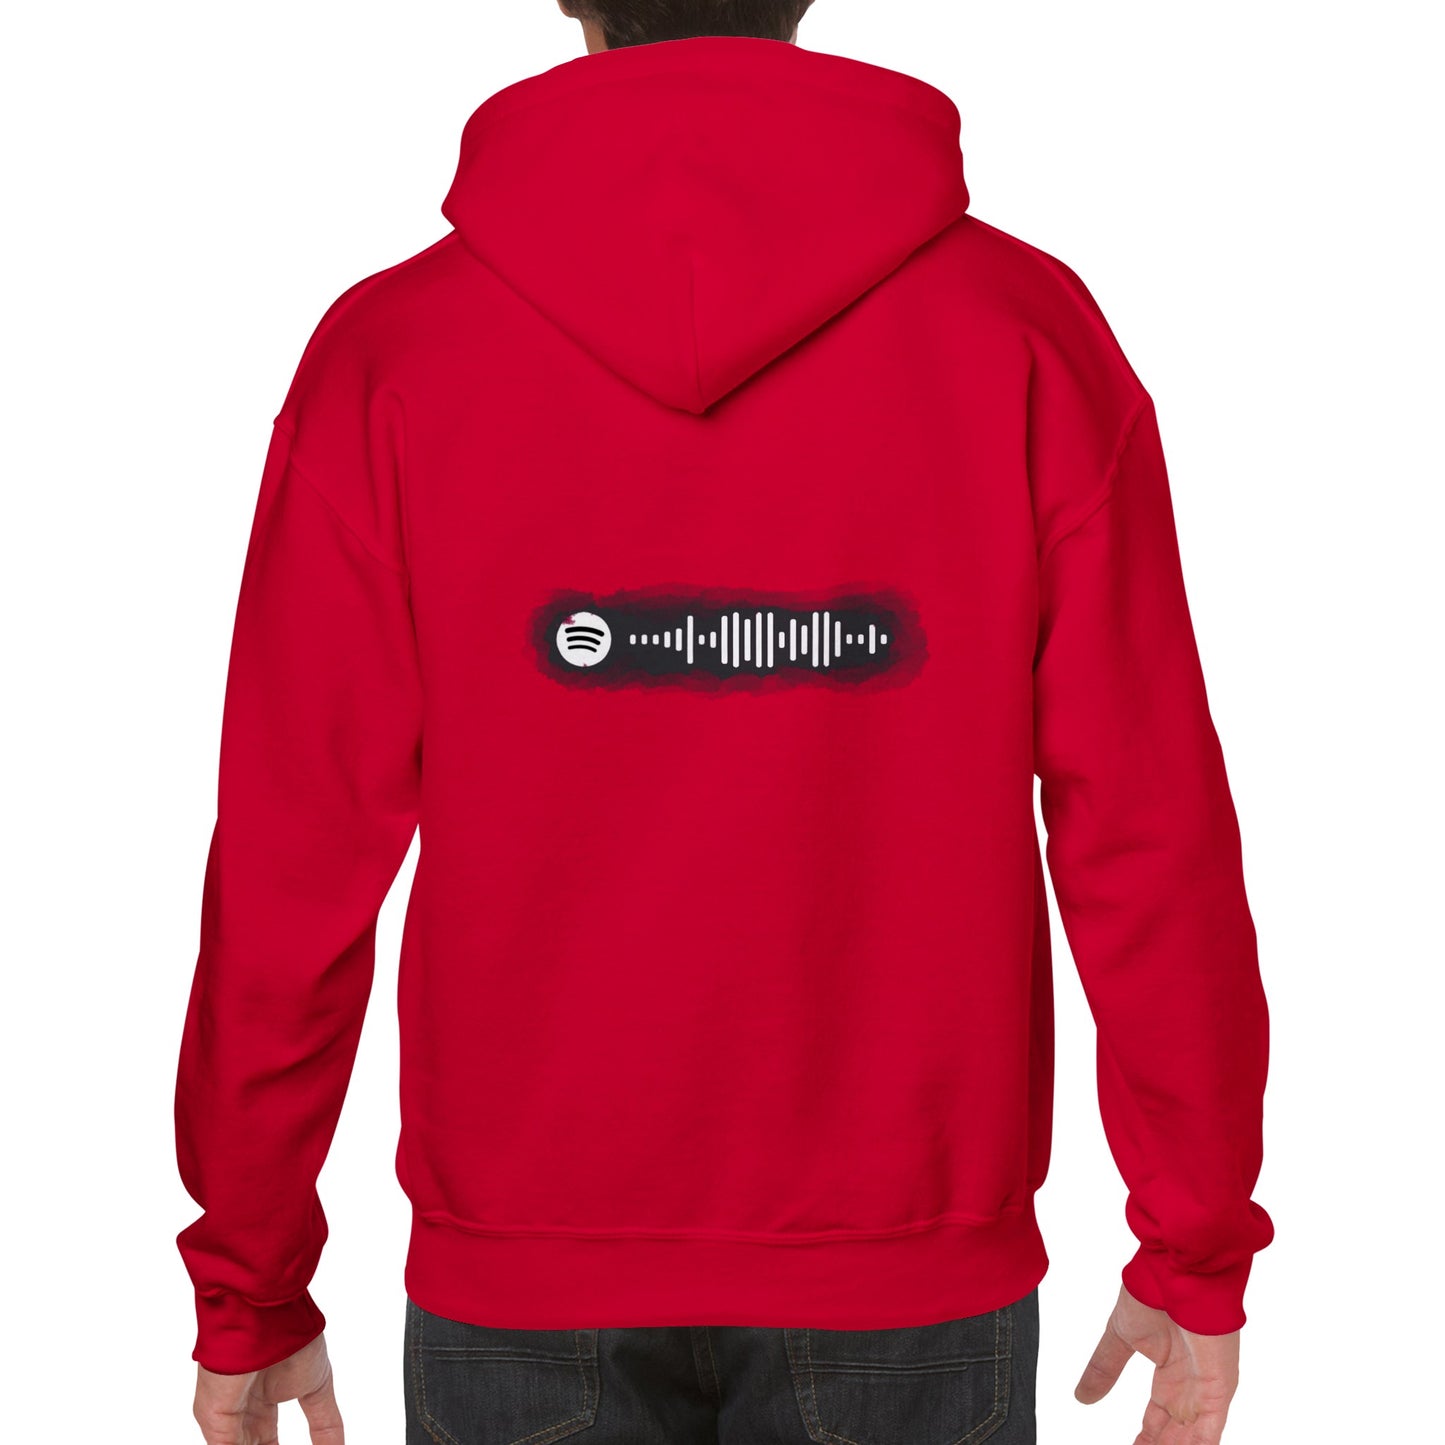 YEAT-SYSTEM HOODIE